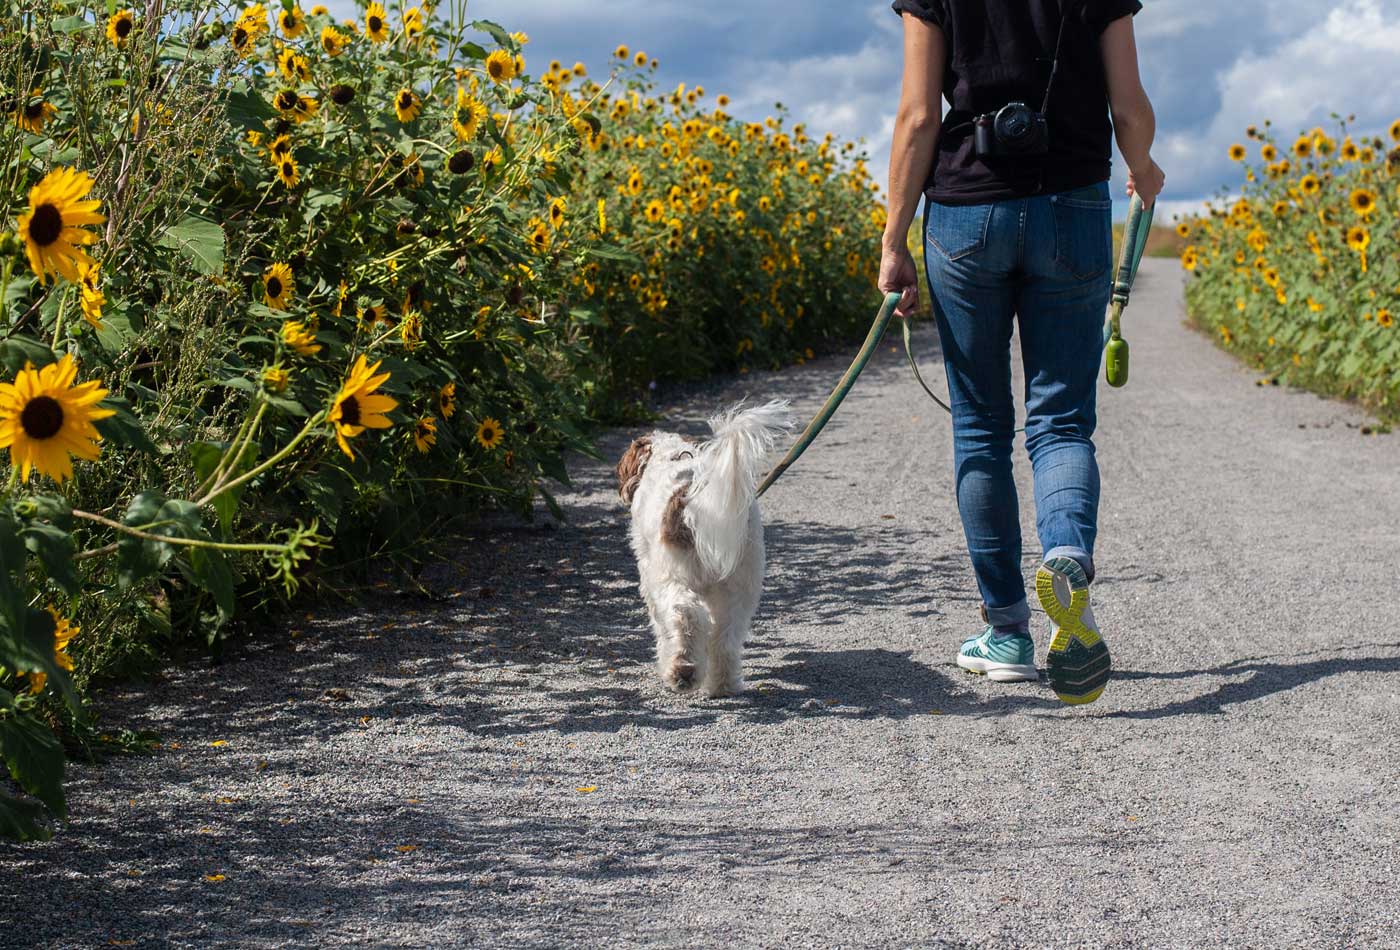 How to set up a dog walking business - Walking through the countryside